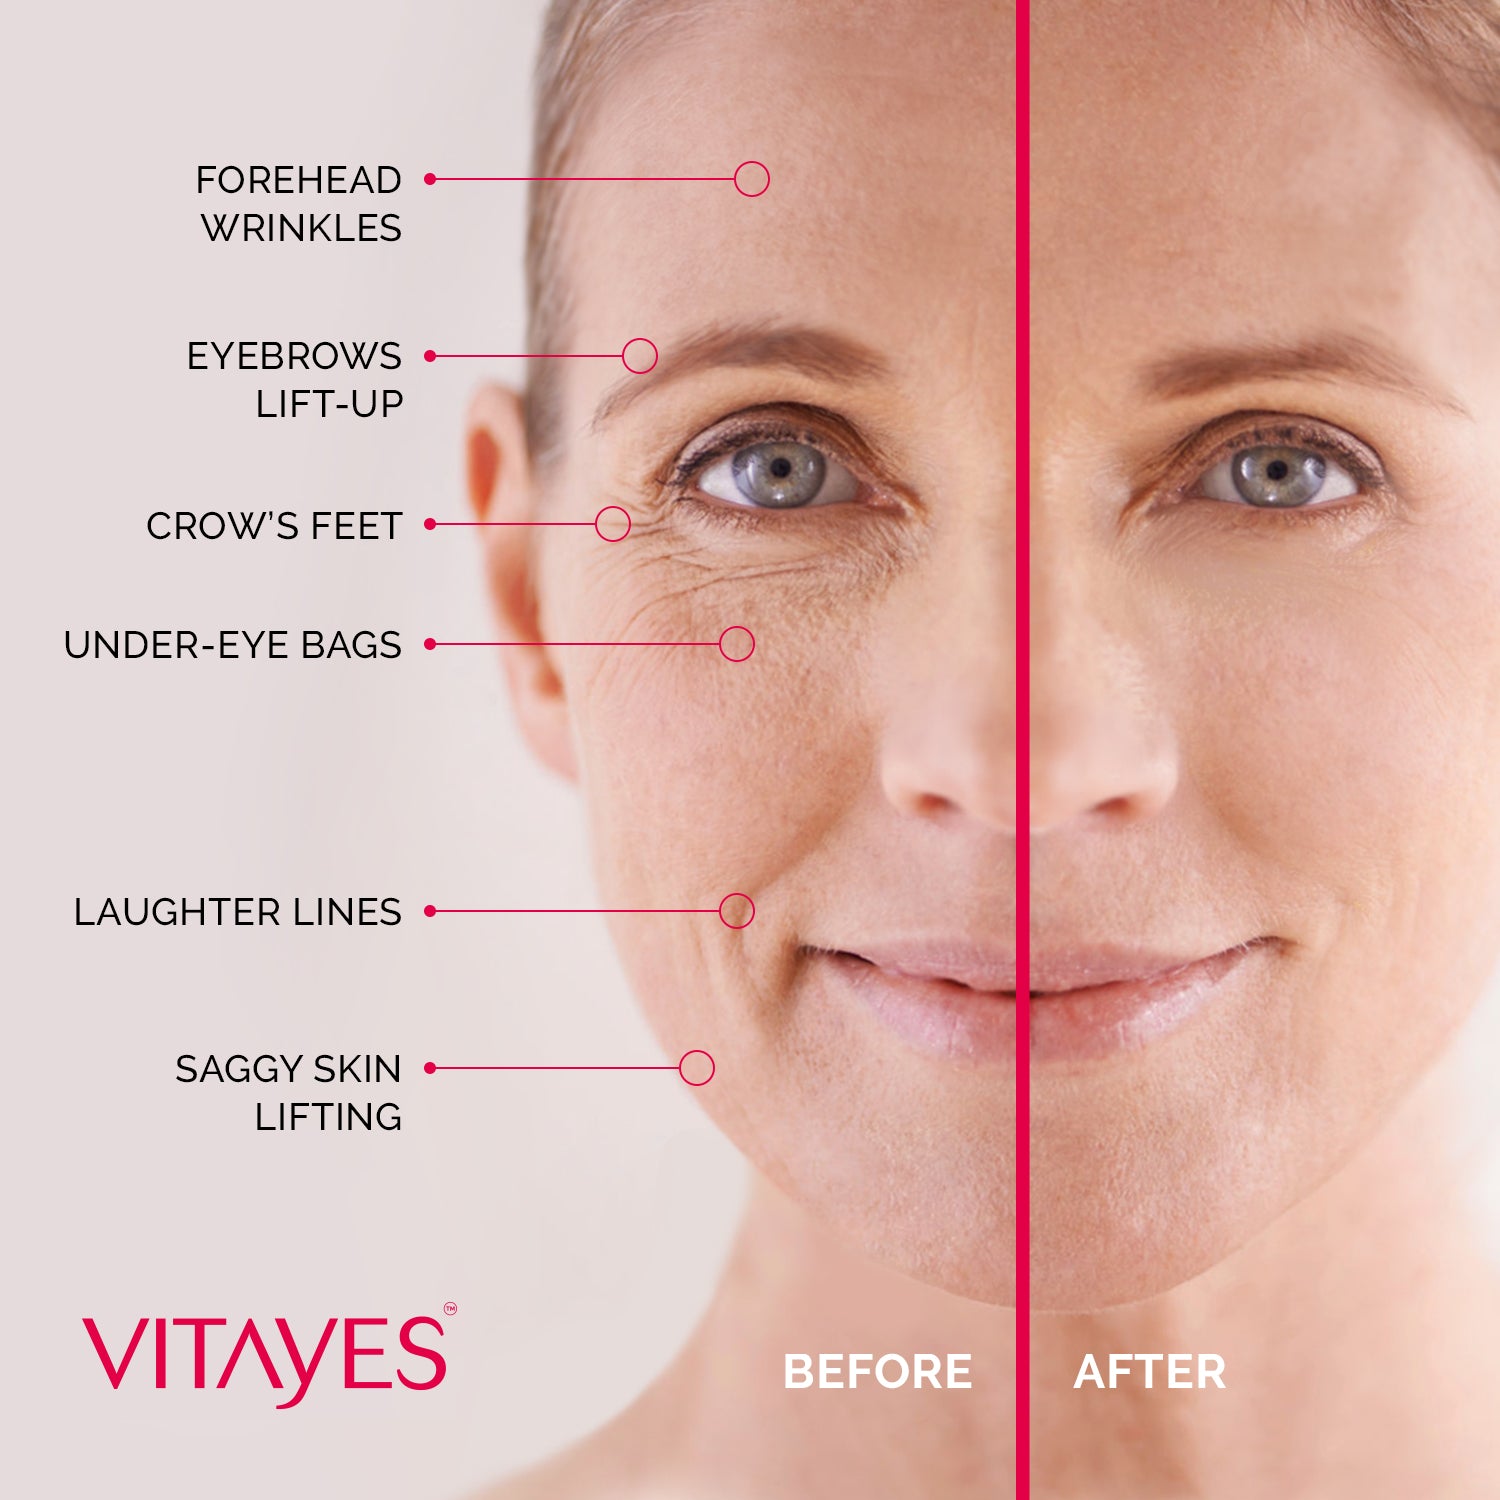 Smart second skin reduces eye bags and wrinkles – or so it seems